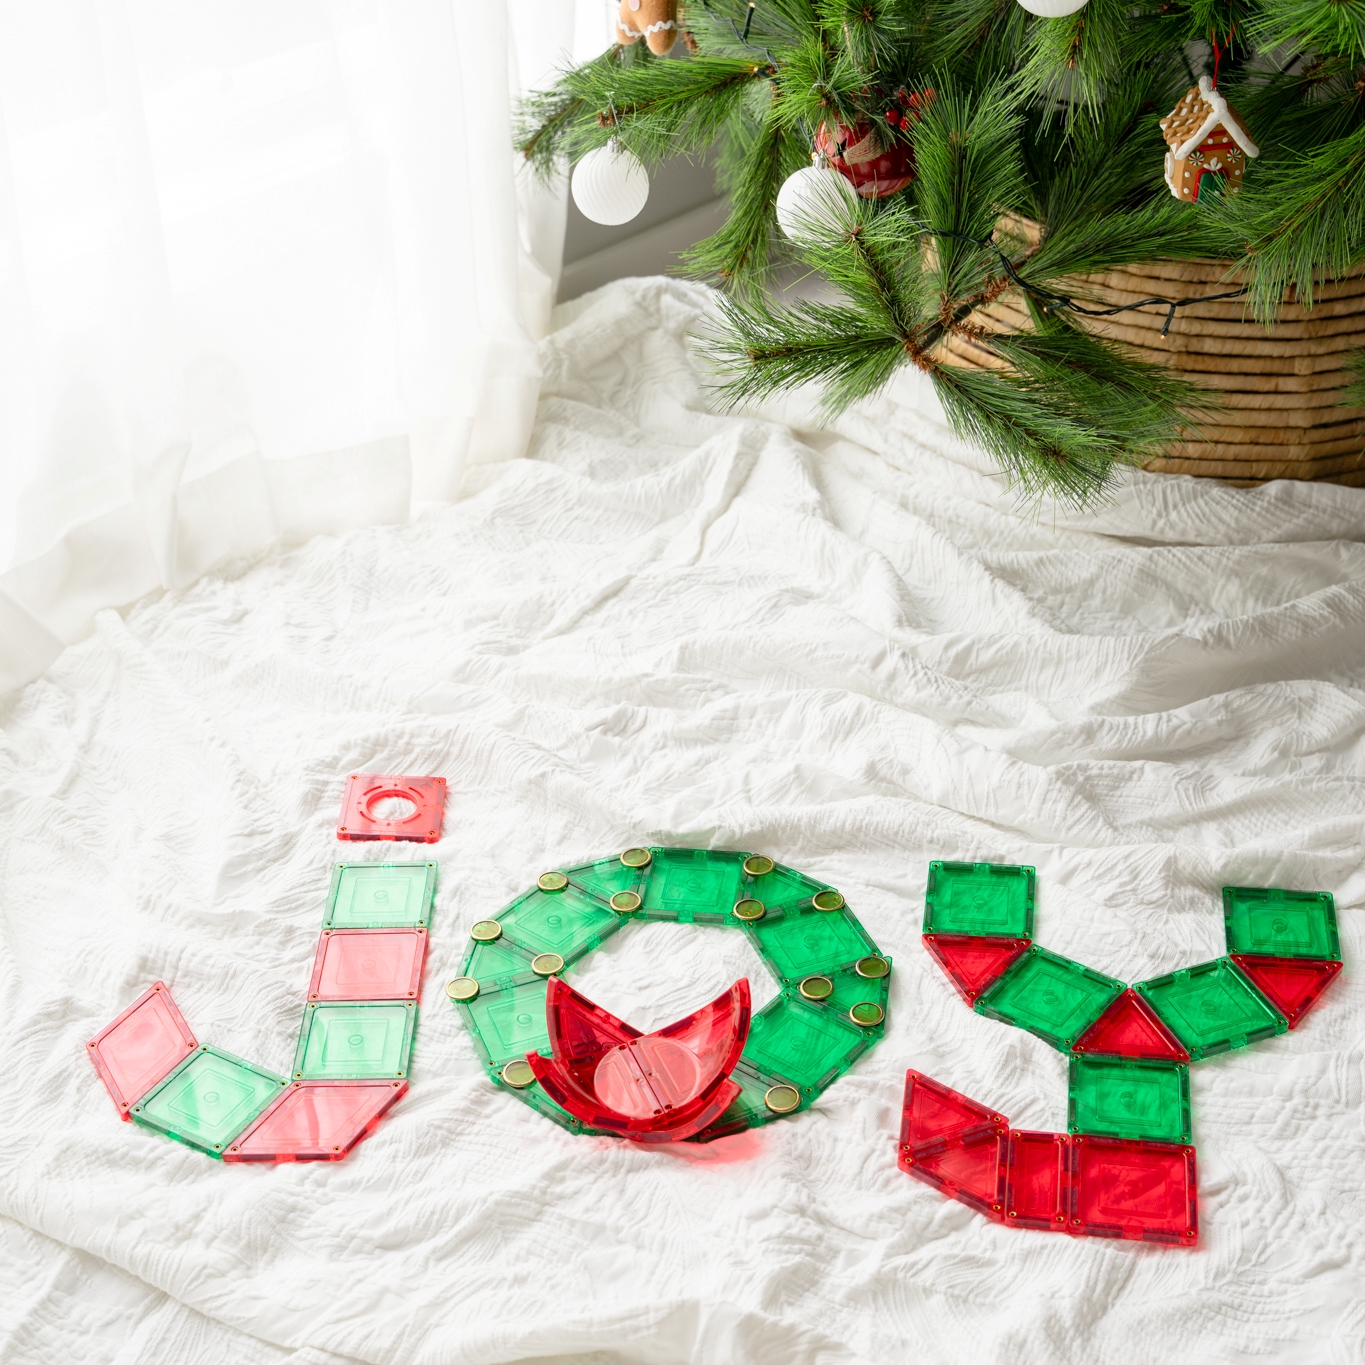 Joy spelt in learn and grow toys magnetic tiles with christmas tree in background